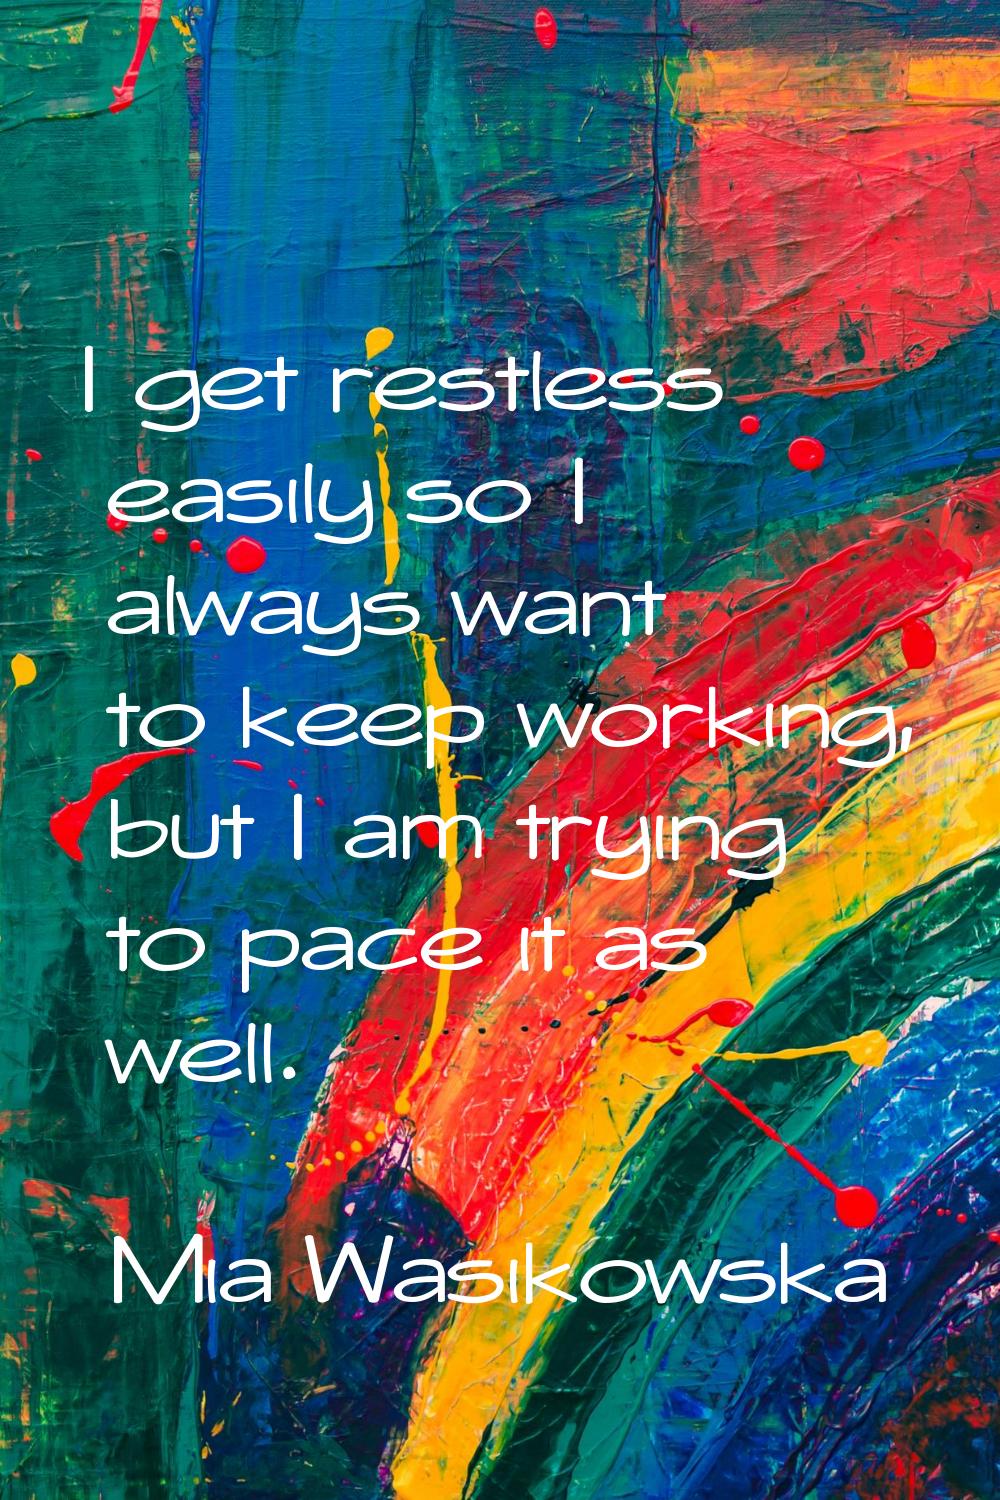 I get restless easily so I always want to keep working, but I am trying to pace it as well.